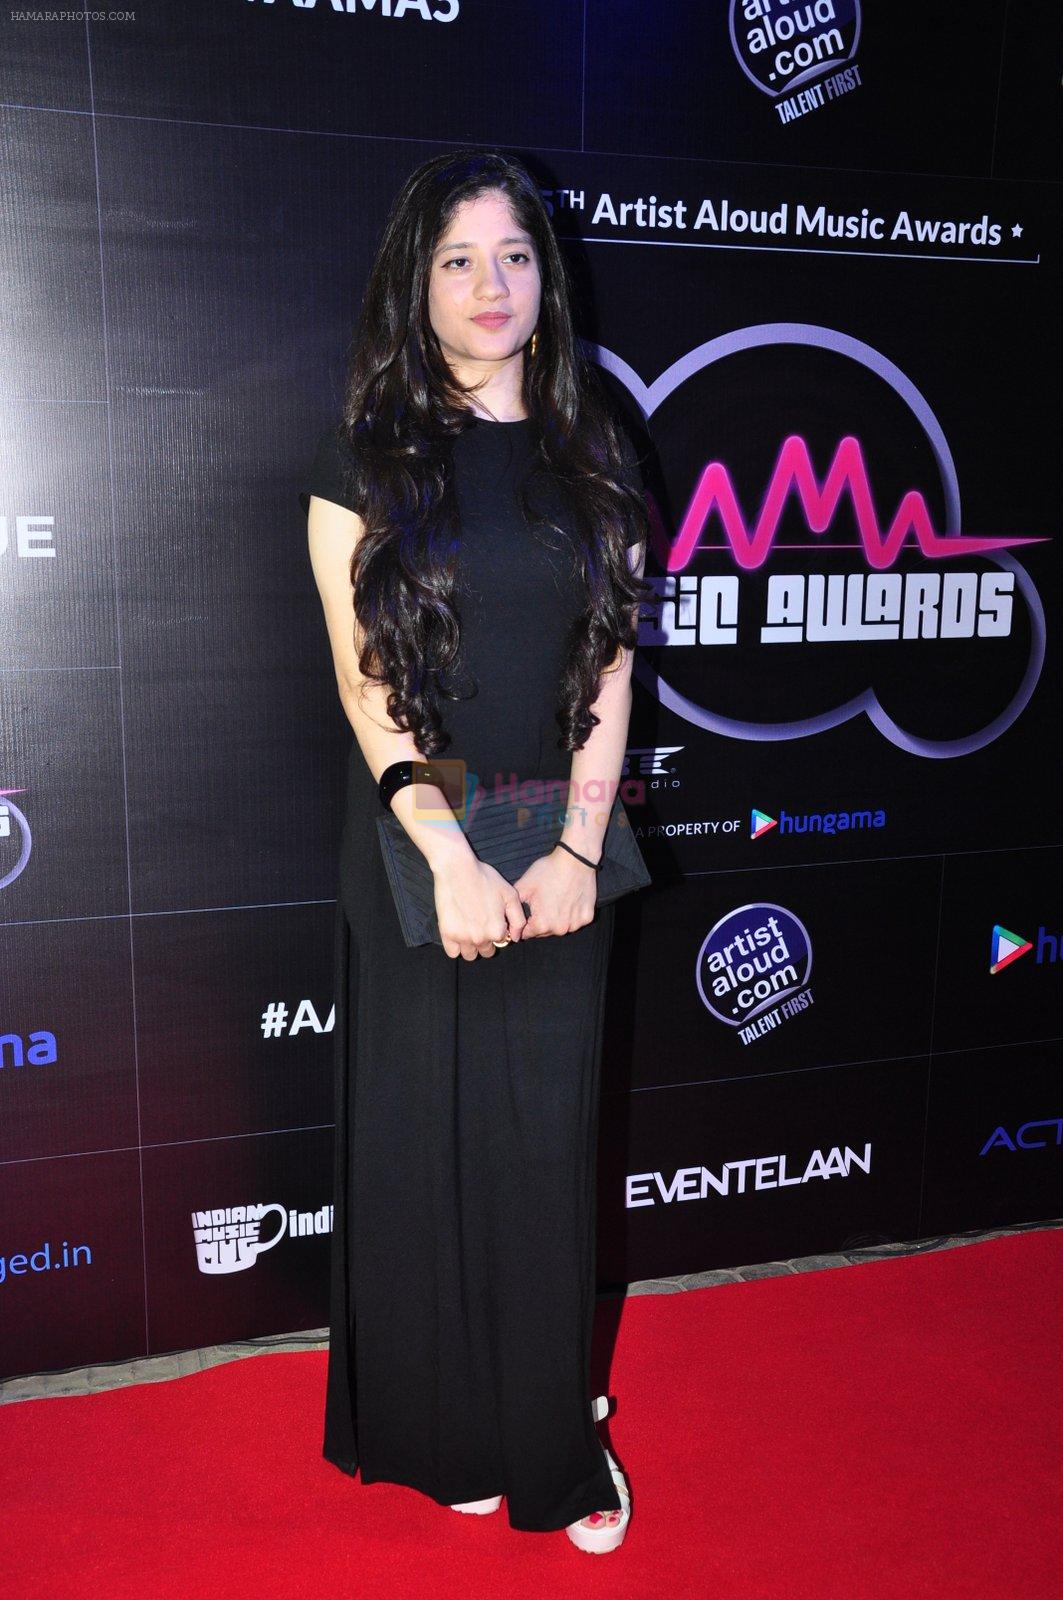 at Artist Aloud Music Awards on 20th April 2016